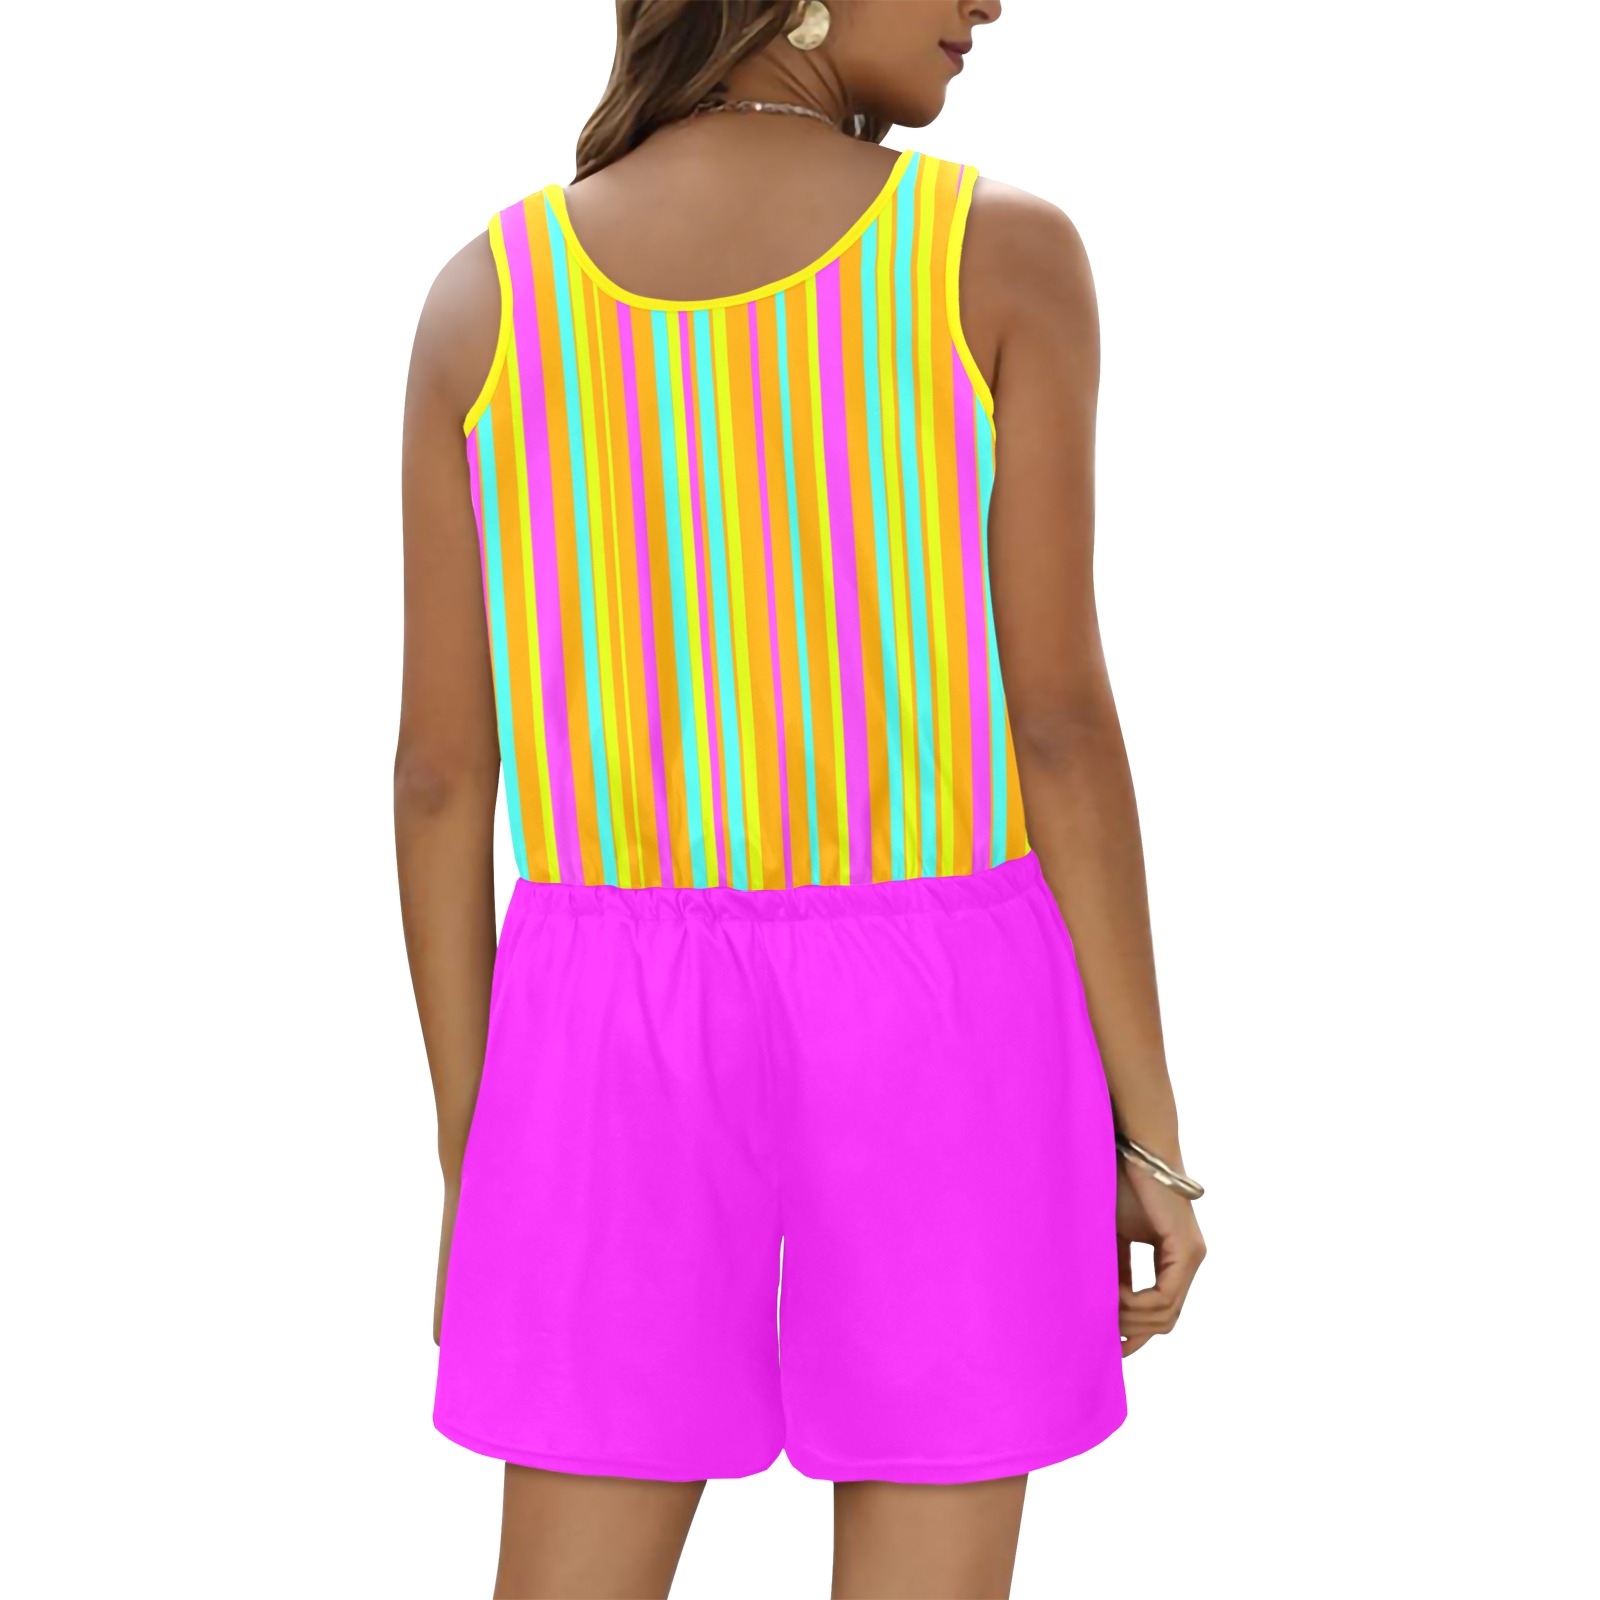 Neon Stripes Tangerine Turquoise Yellow Pink All Over Print Vest Short Jumpsuit